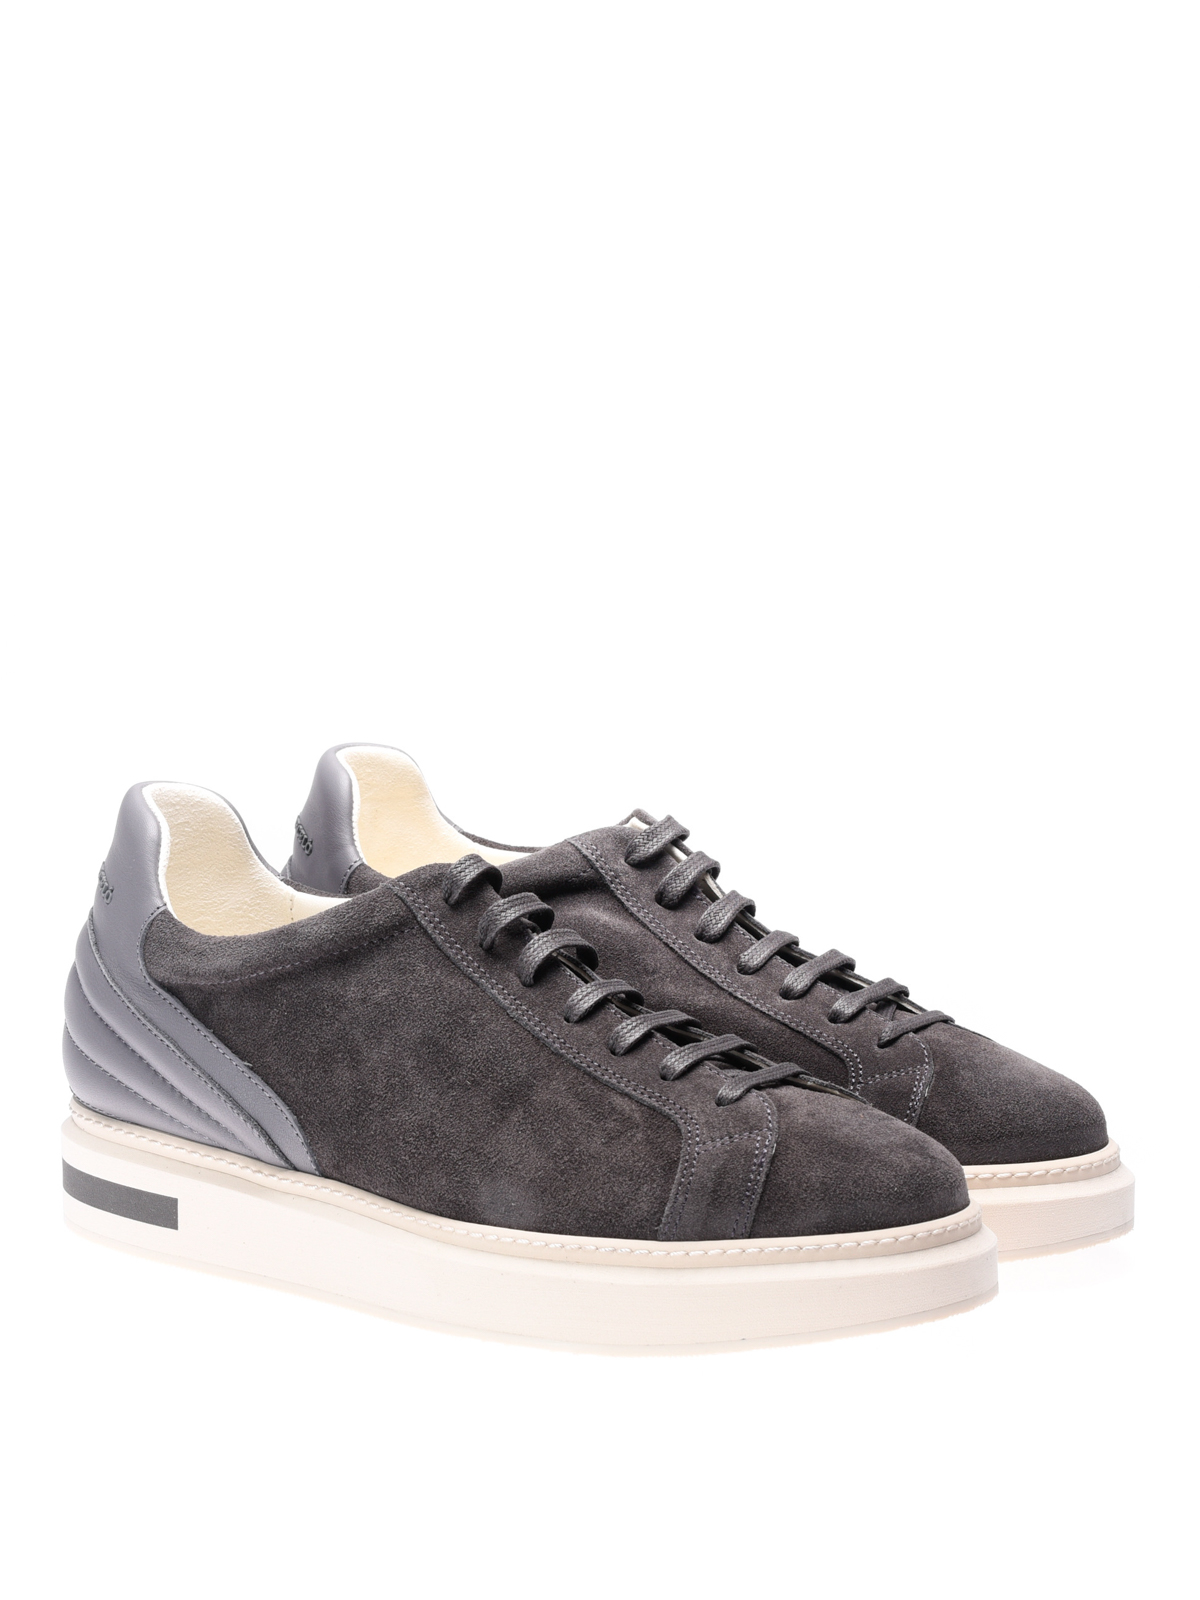 Trainers Paloma Barcelò - Stefan suede and leather sneakers - 07LBSU10